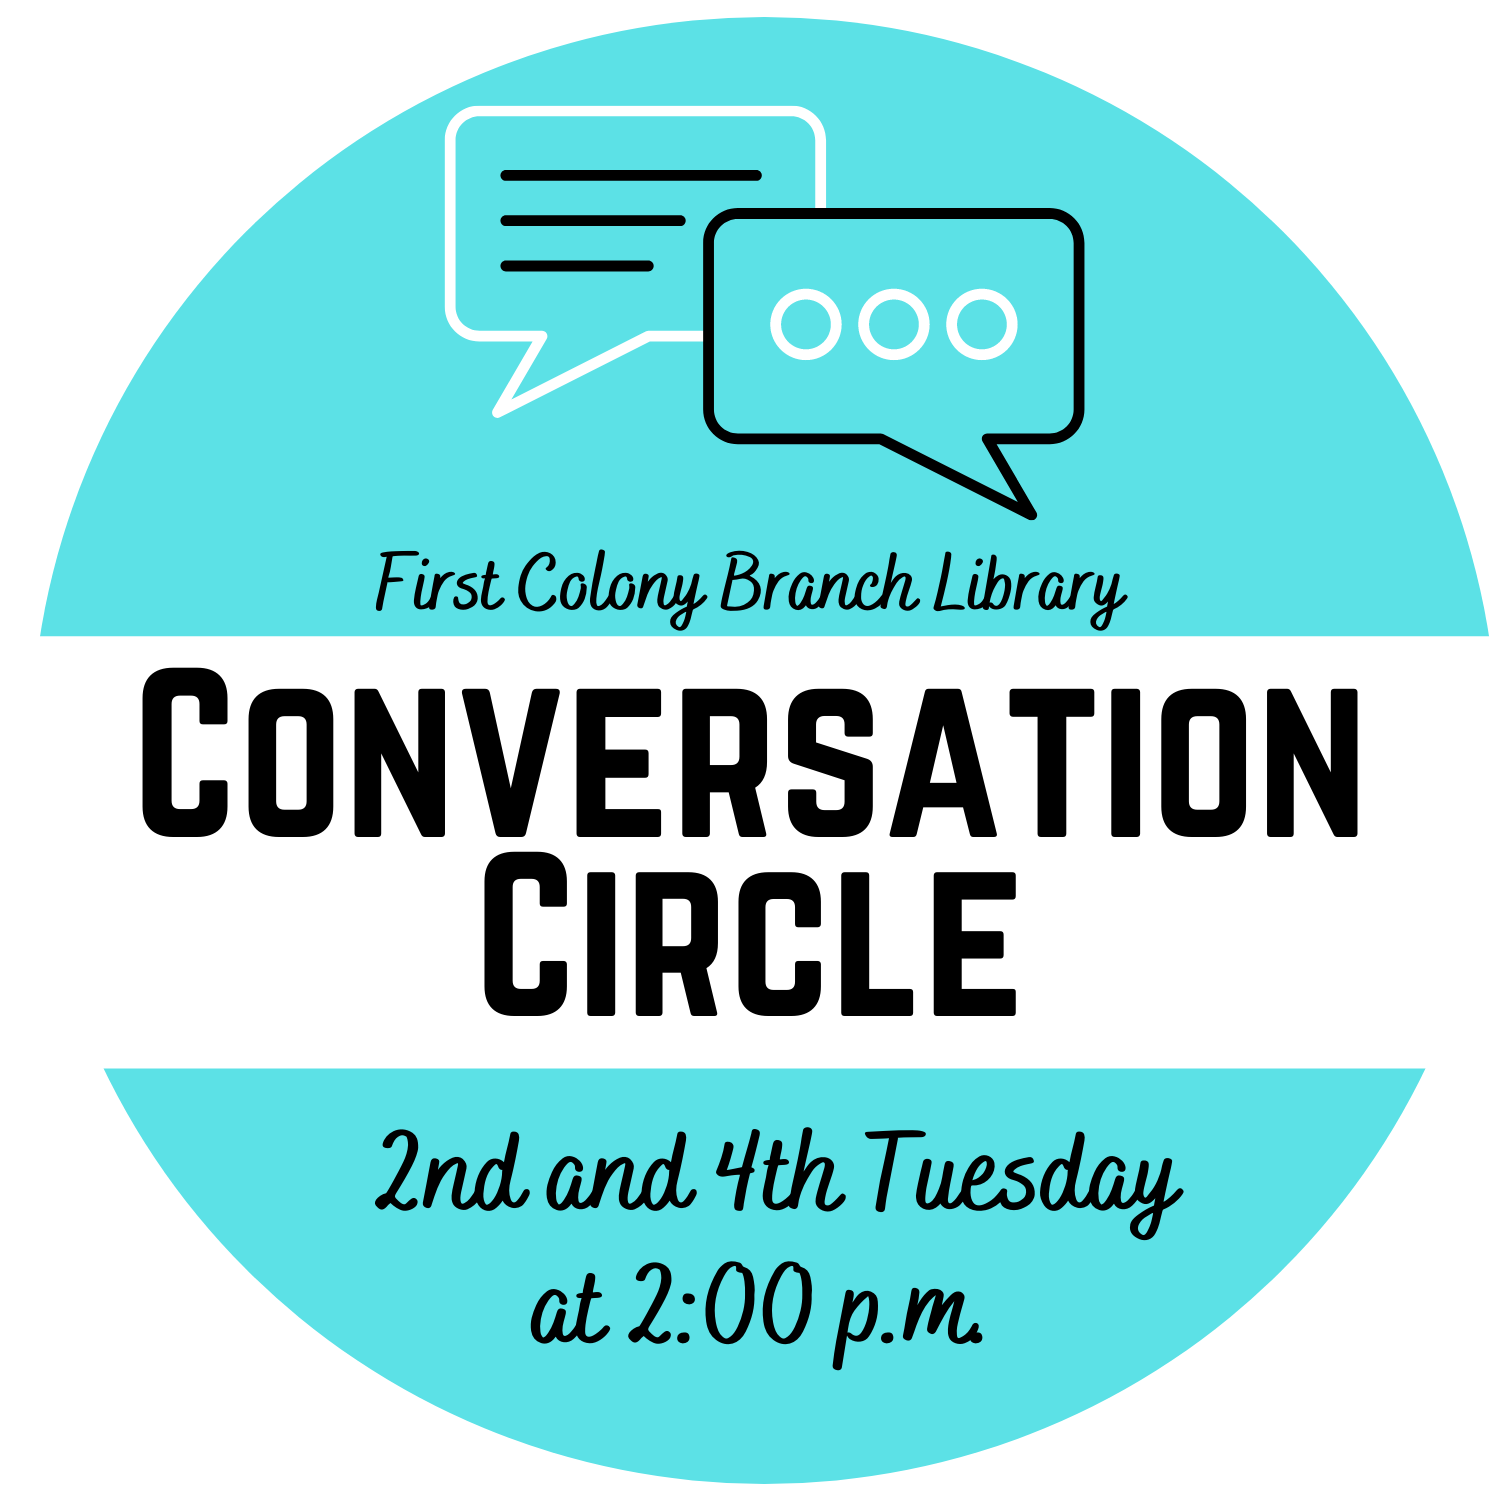 Image of speech bubbles and text saying Conversation Circle 2nd and 4th Tuesday at 2:00pm